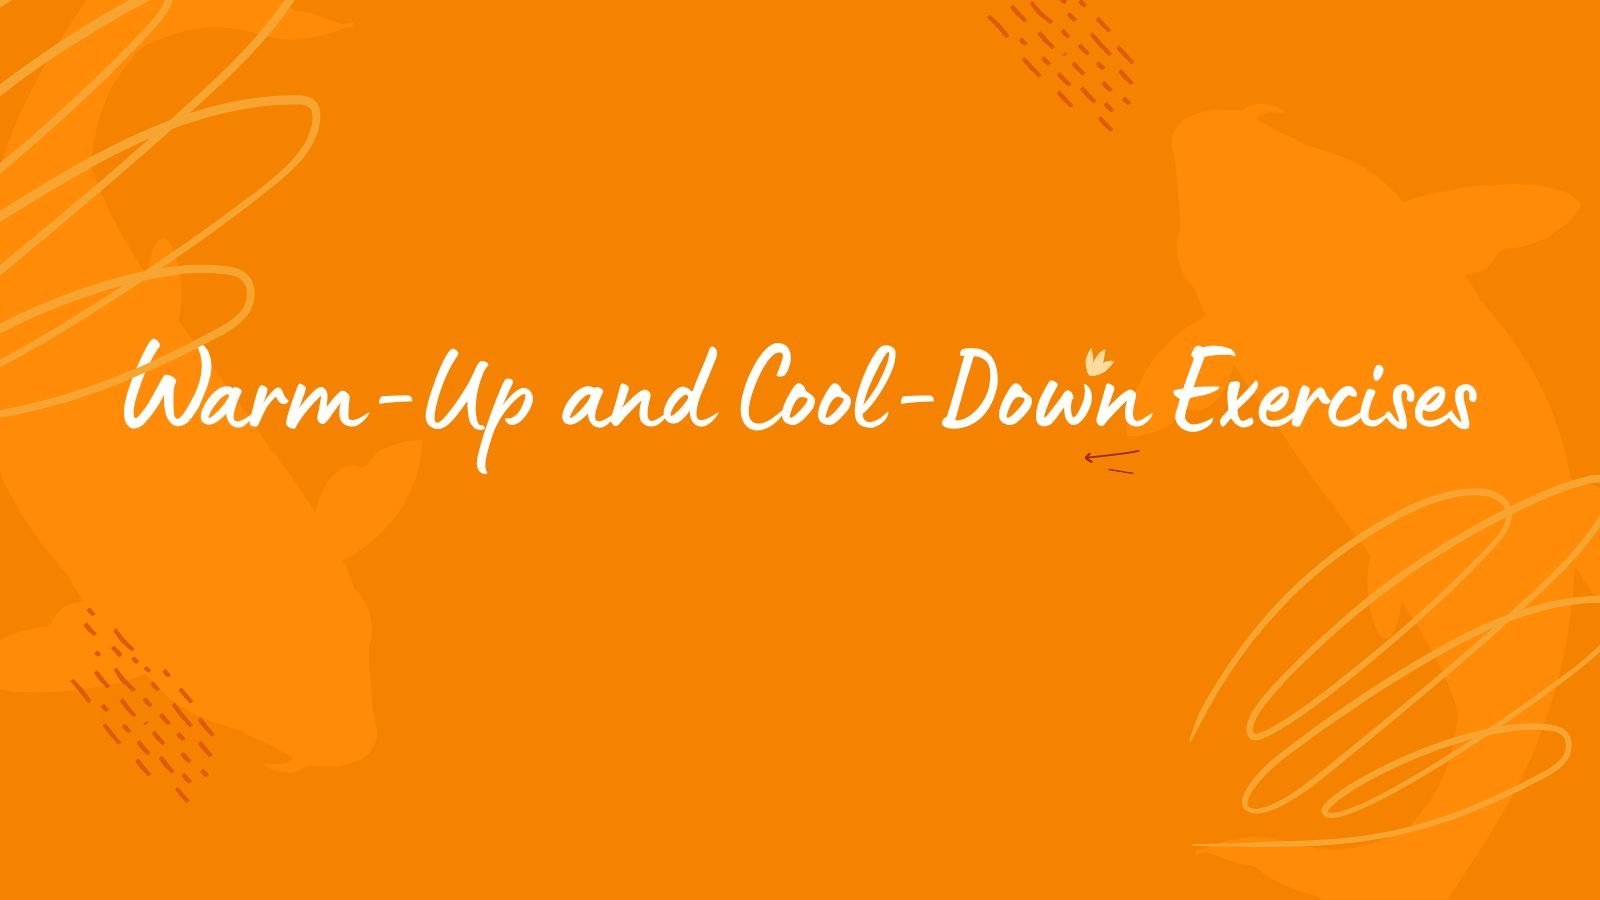 Warm-Up and Cool-Down Exercises